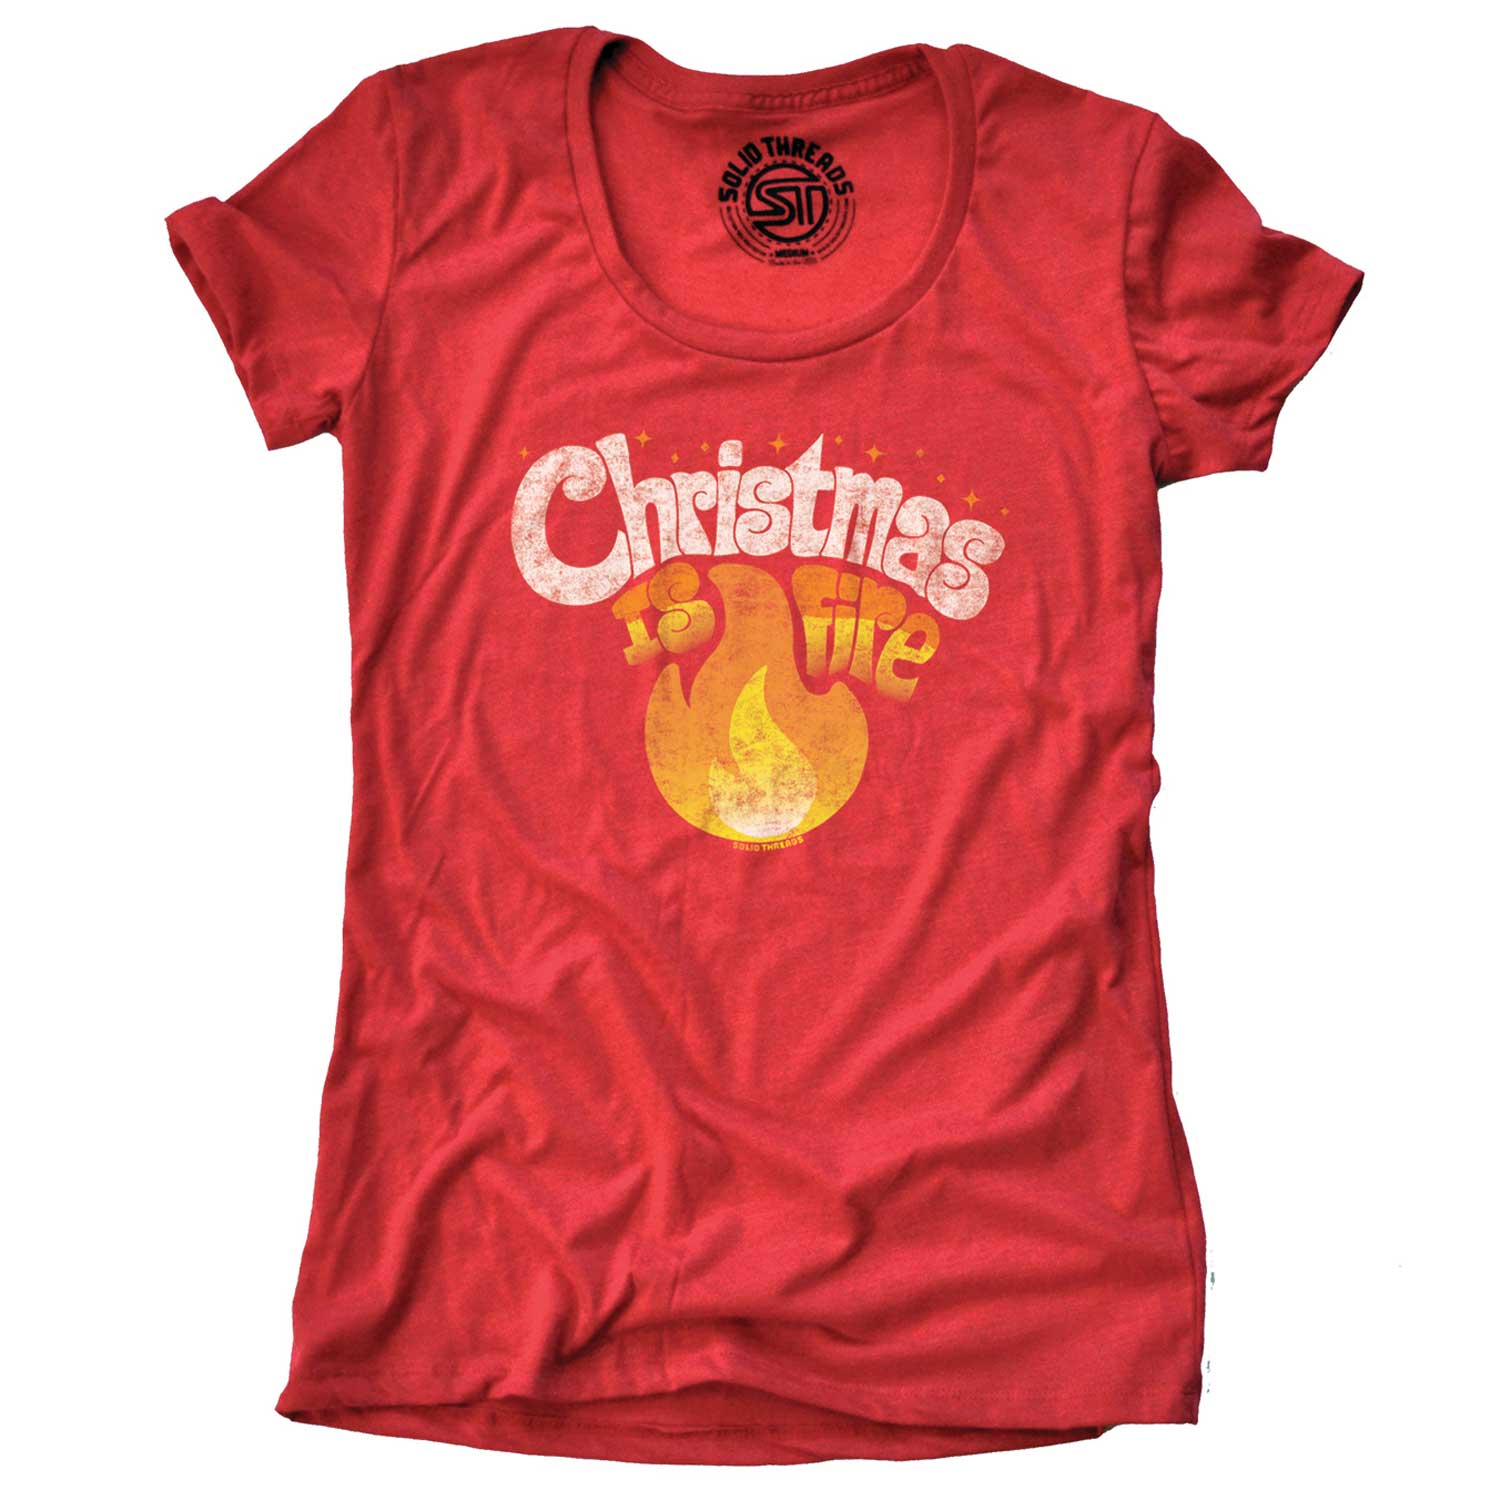 Women's Christmas Is Fire Vintage Graphic T-Shirt | Funny Holiday Party Tee | Solid Threads